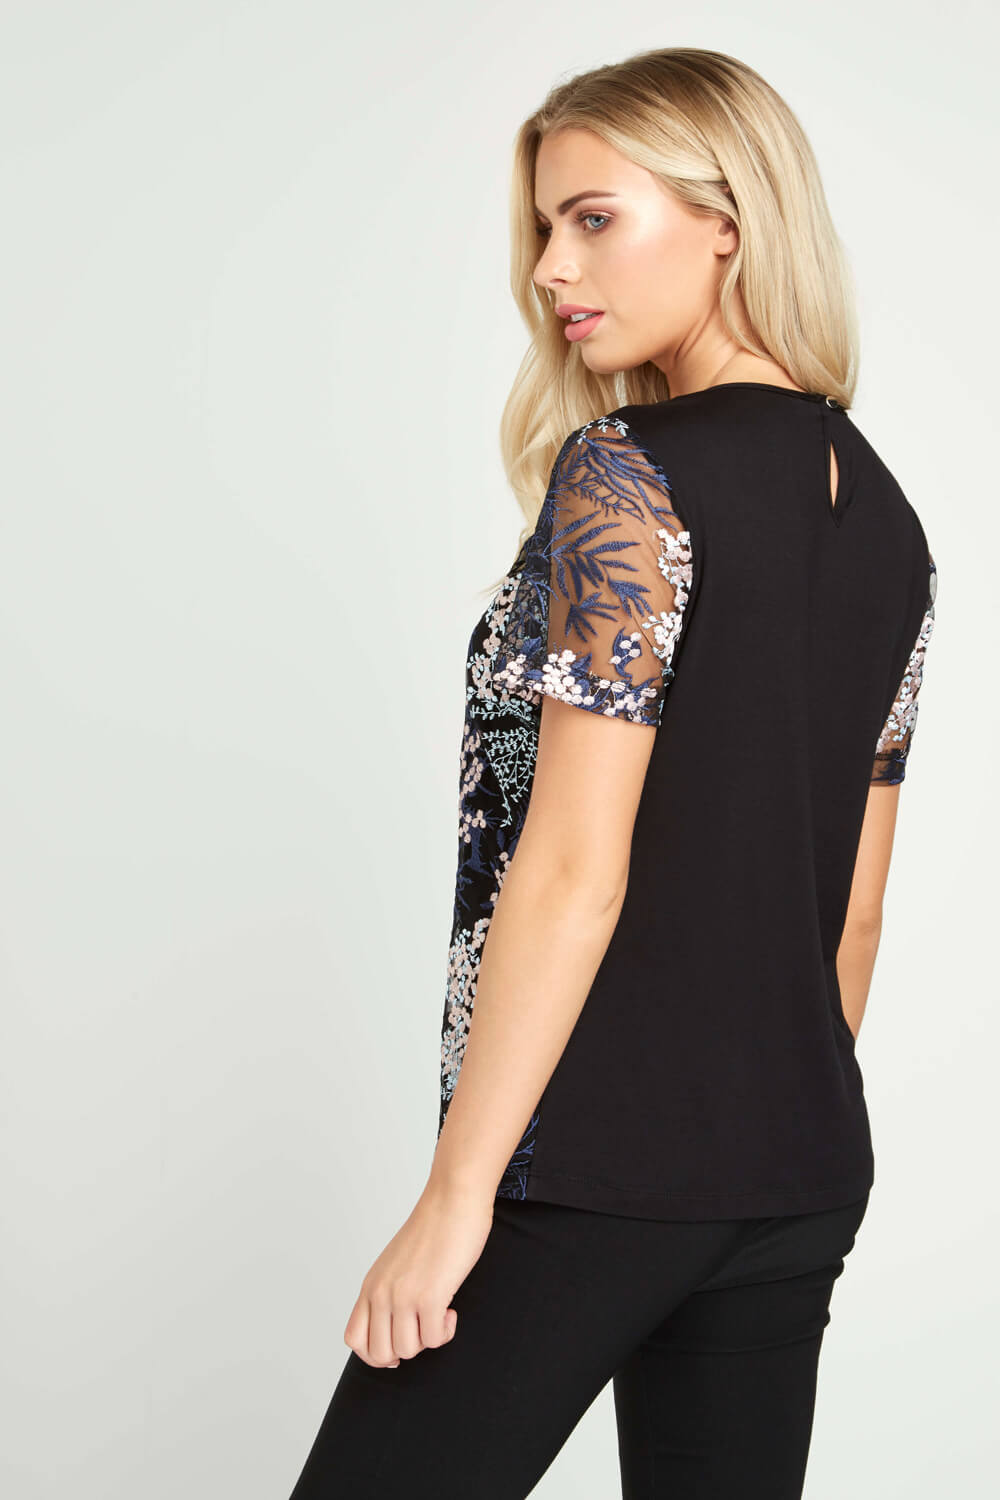 Black Mesh Floral Embroidered Tee, Image 3 of 5